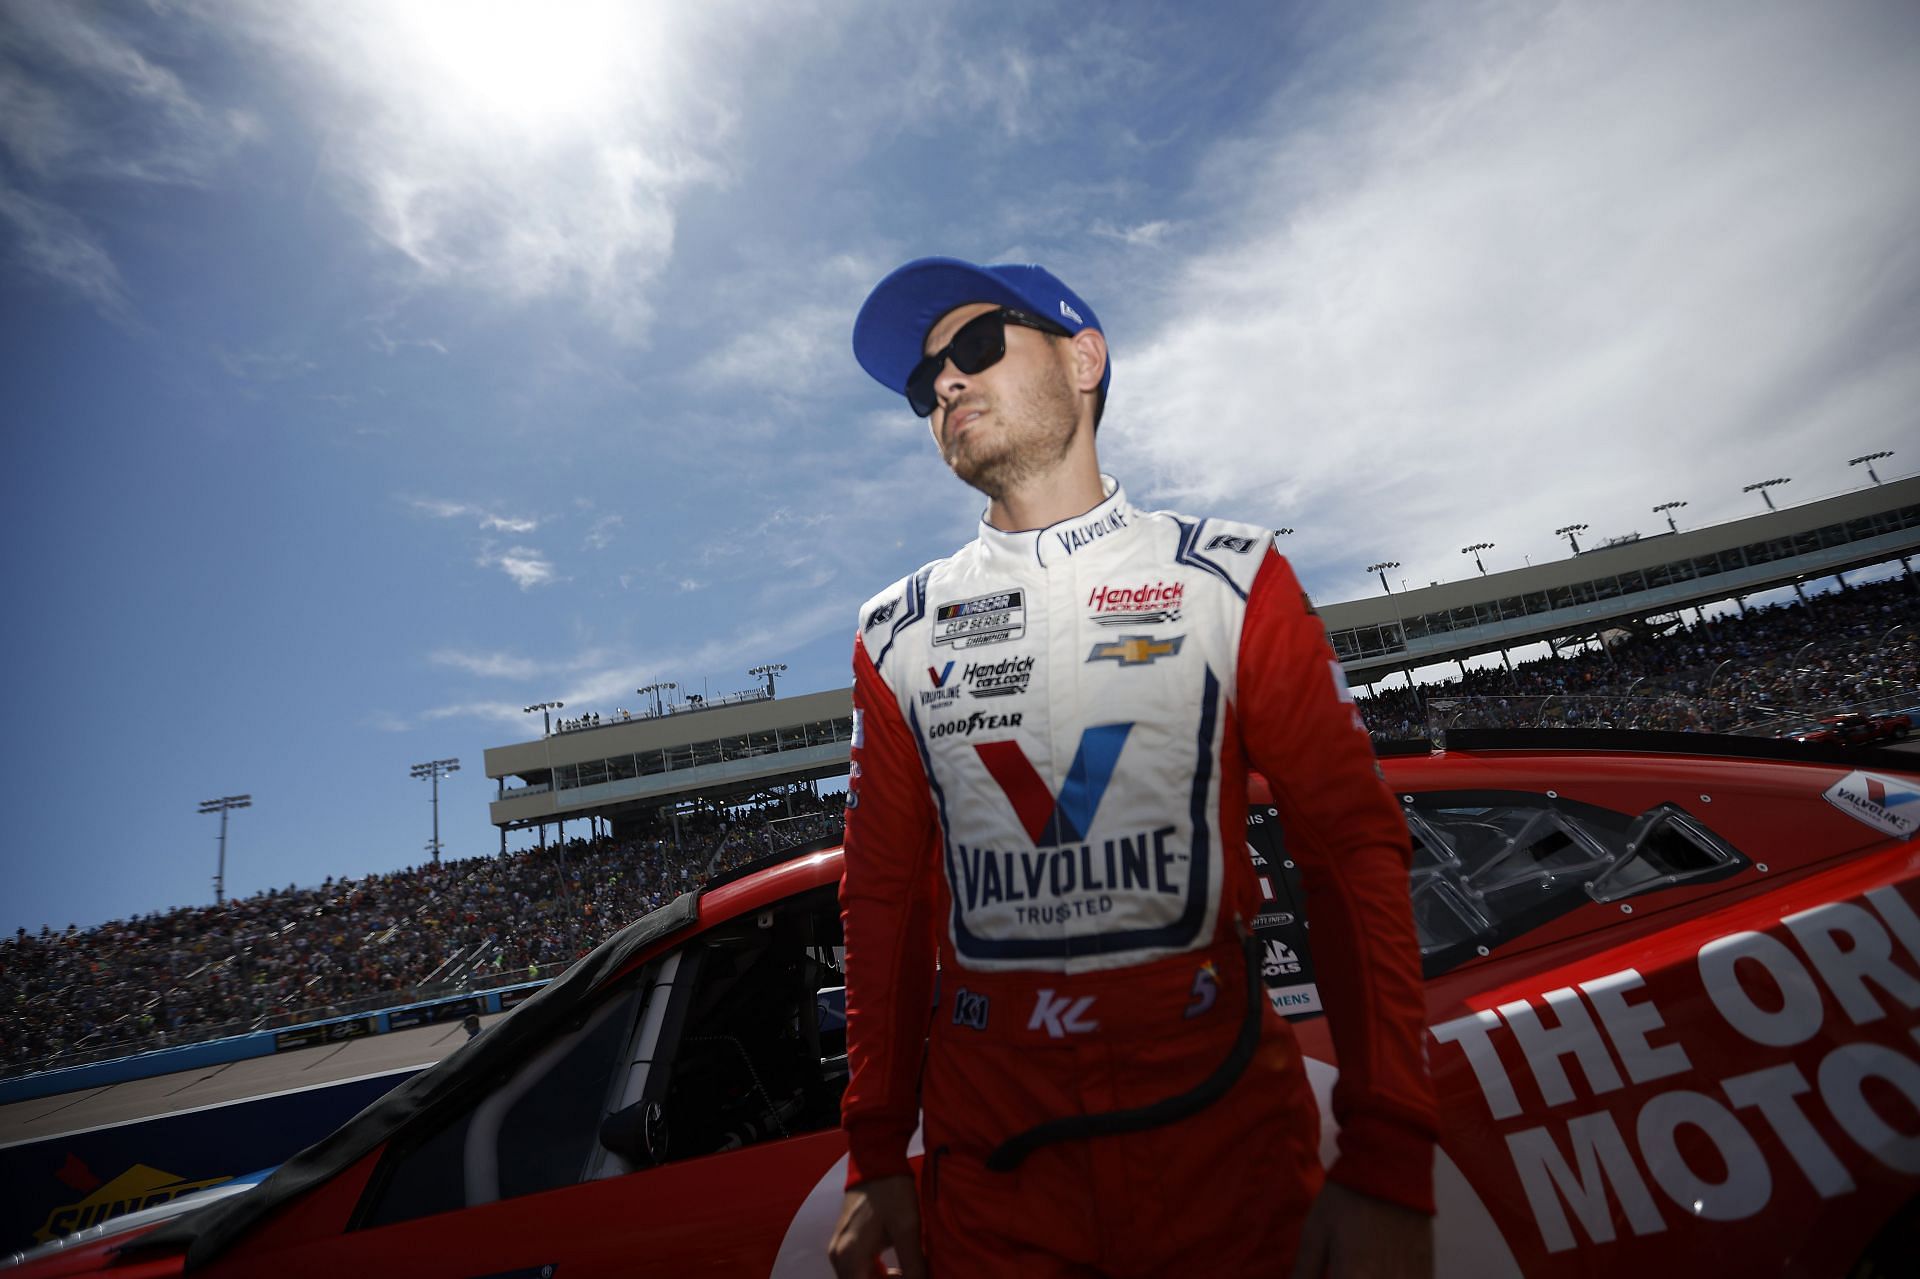 Kyle Larson stands on the grid prior to the Ruoff Mortgage 500 during at Phoenix Raceway (Photo by Sean Gardner/Getty Images)